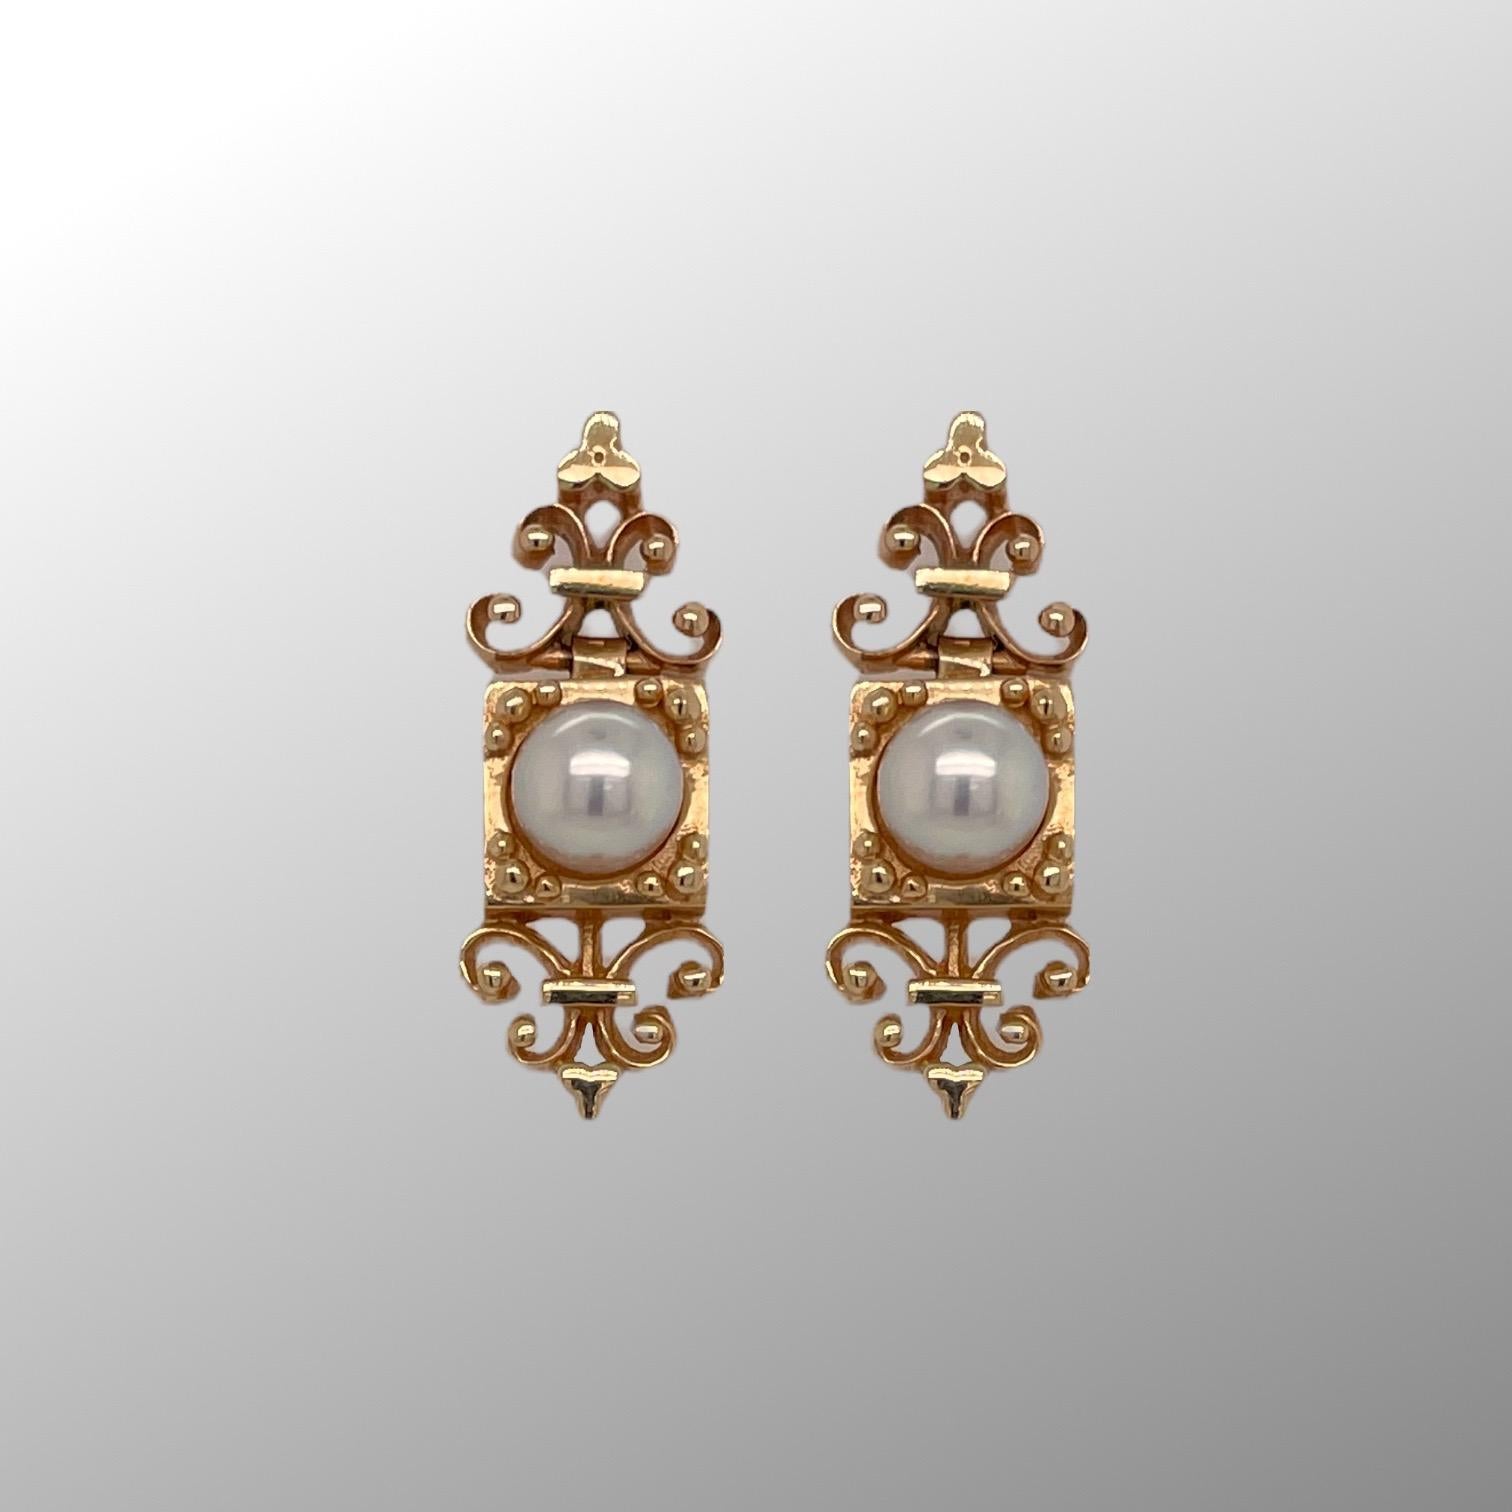 Vintage style earrings are in 14k yellow gold and contain two 5.8mm south sea pearls. Earrings measure approximately 1